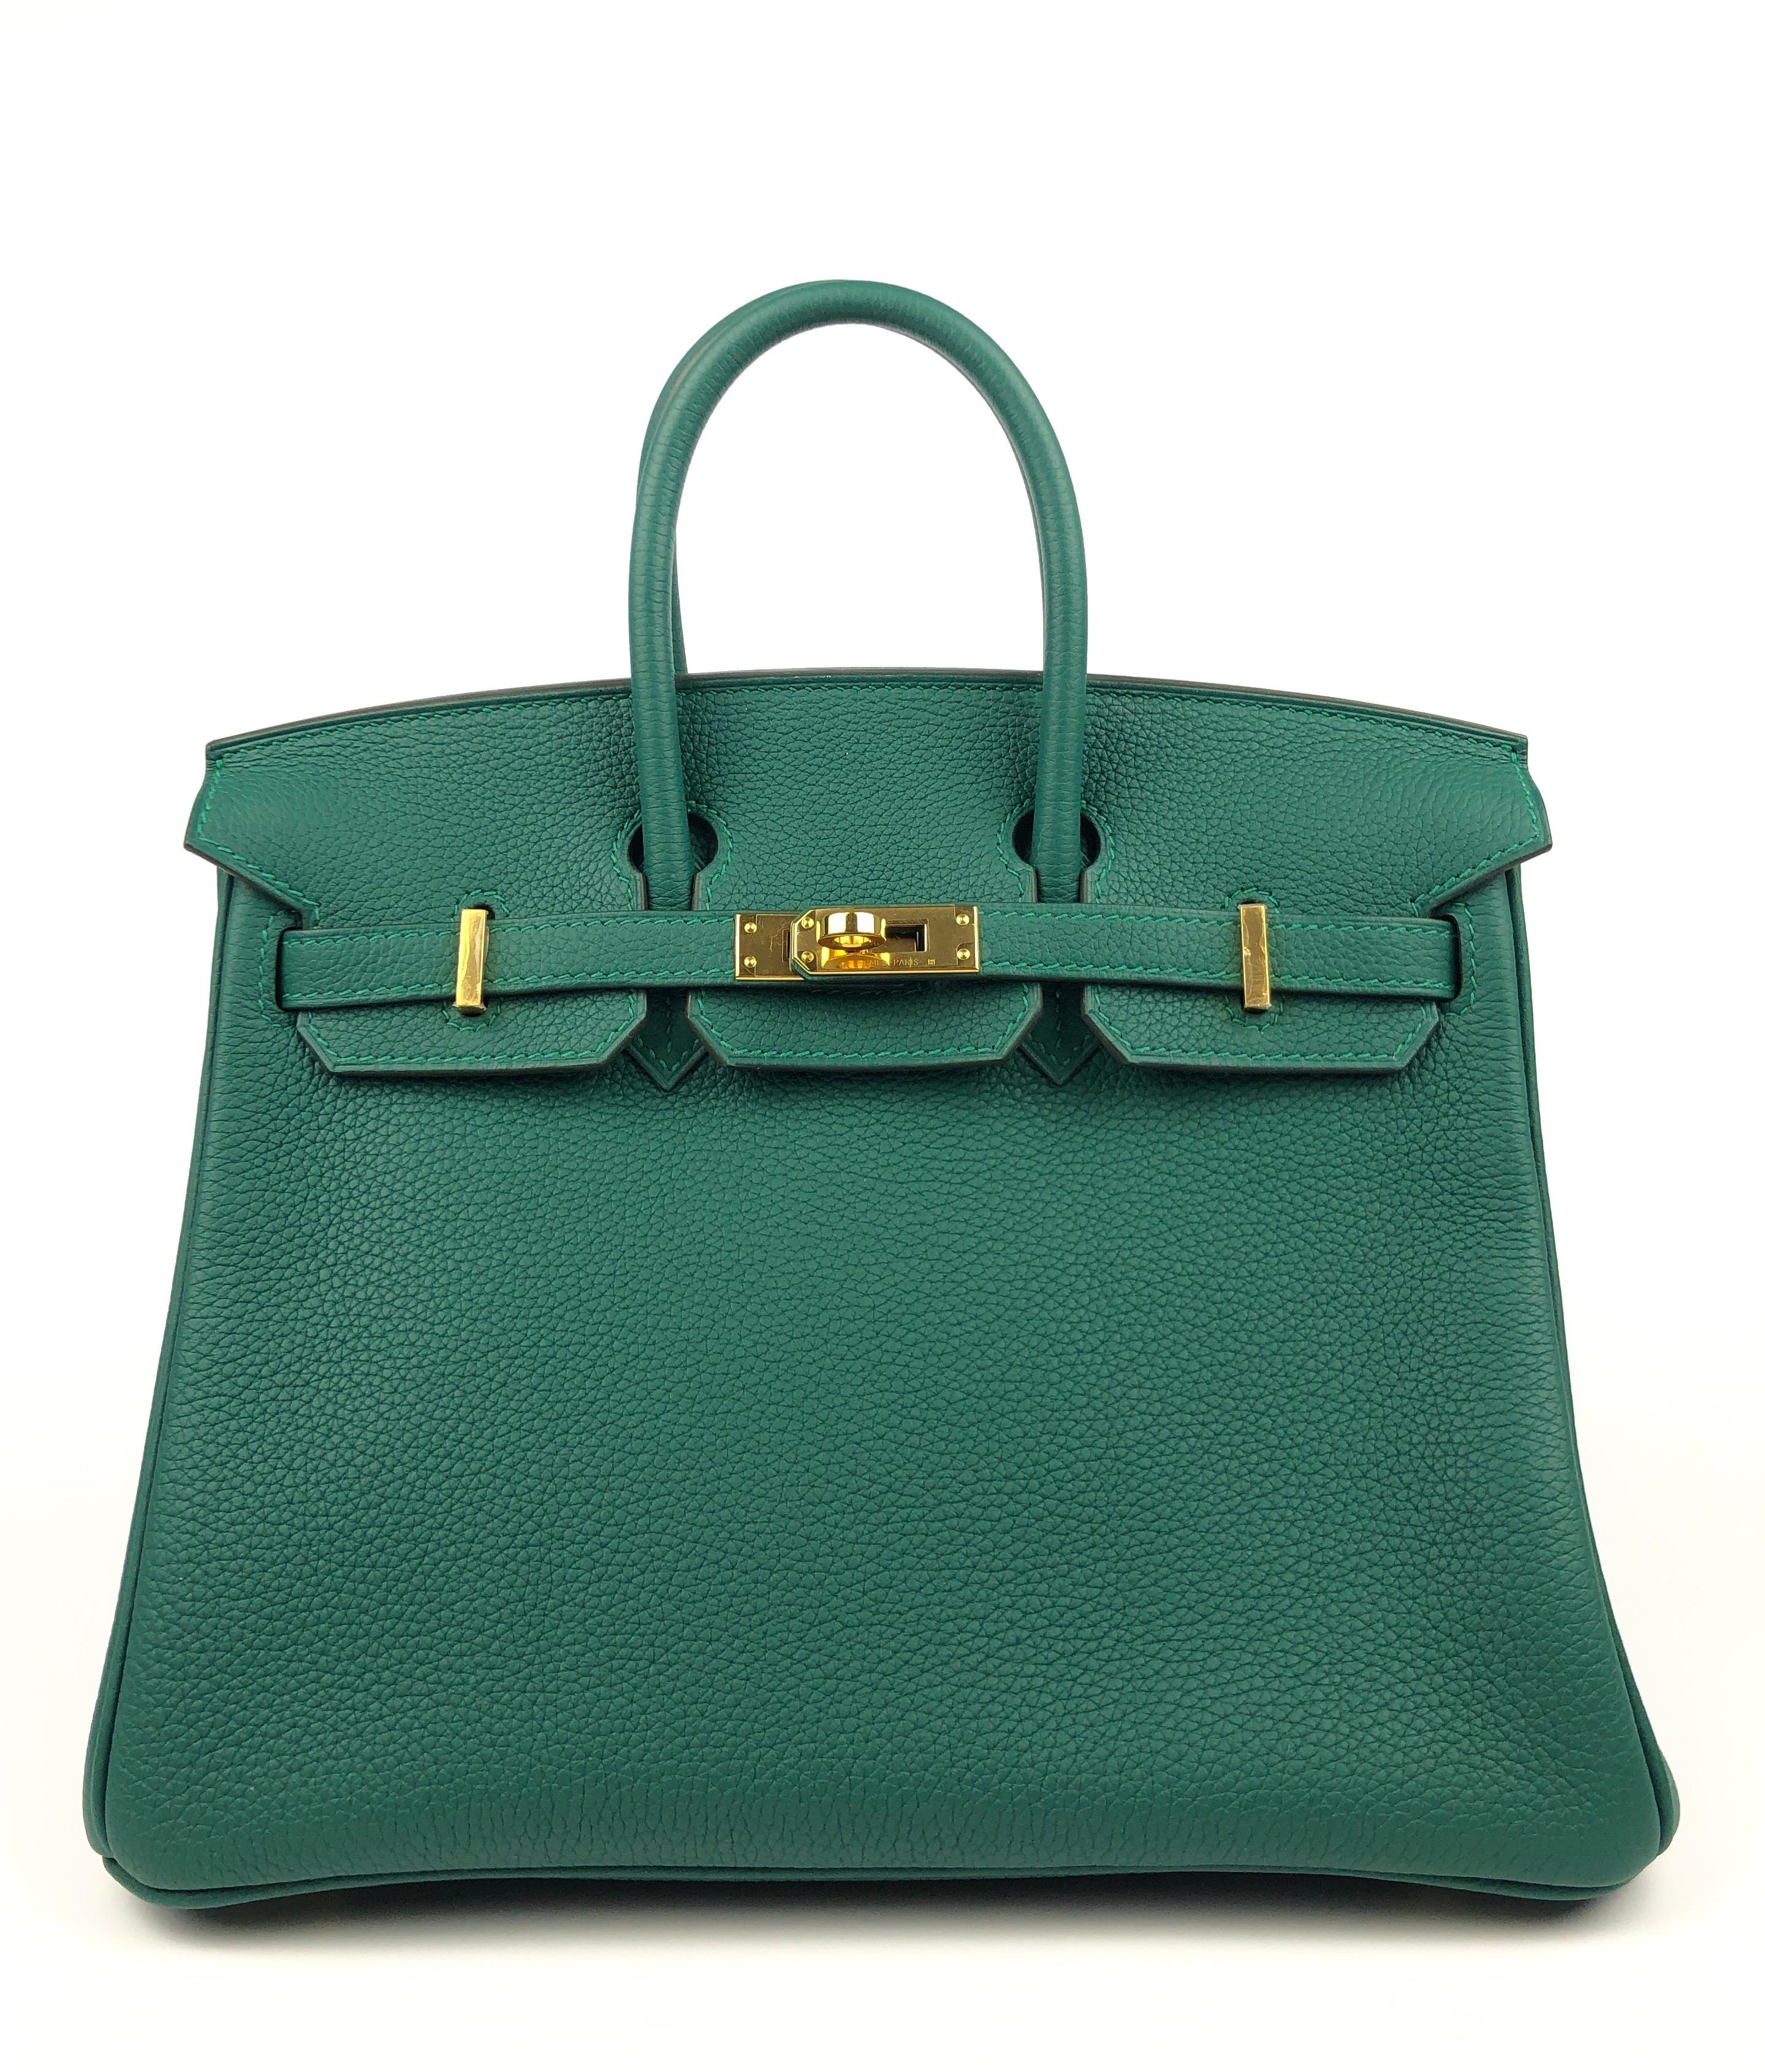 Stunning Rare Hermes Birkin 25 Malachite Togo Leather Gold Hardware. Almost Like New Condition with Plastic on Hardware, perfect corners and structure. 2017 A Stamp.

Shop with Confidence from Lux Addicts. Authenticity Guaranteed! 